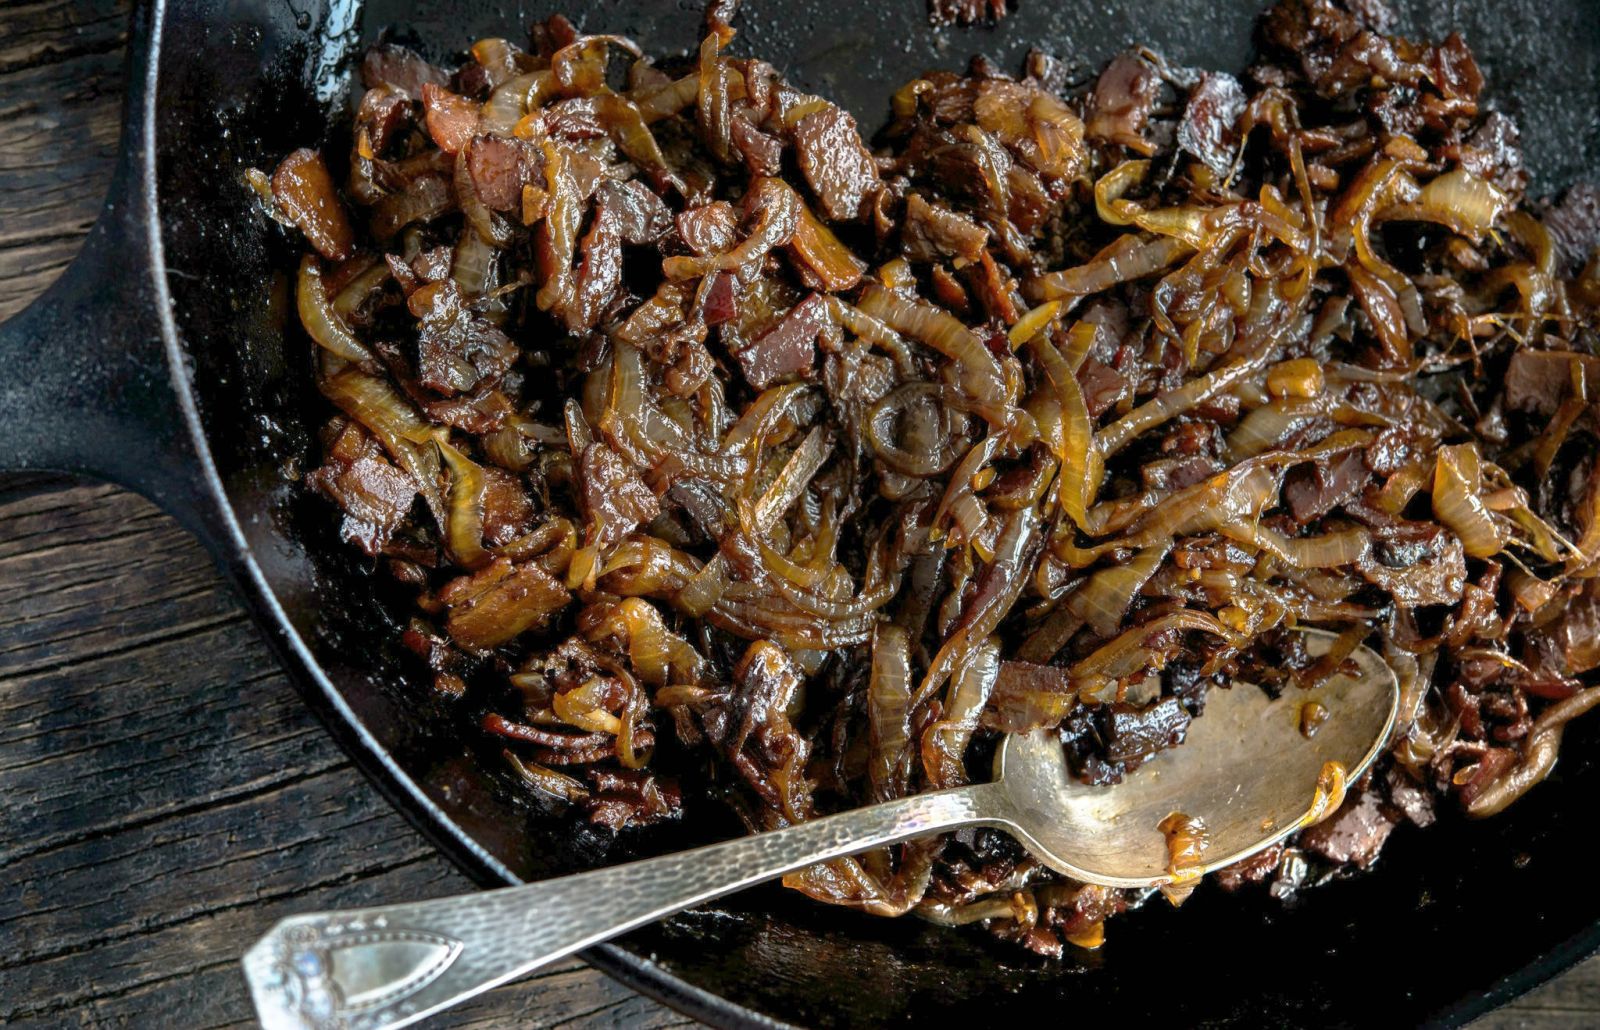 Caramelized-Onions-With-Cider